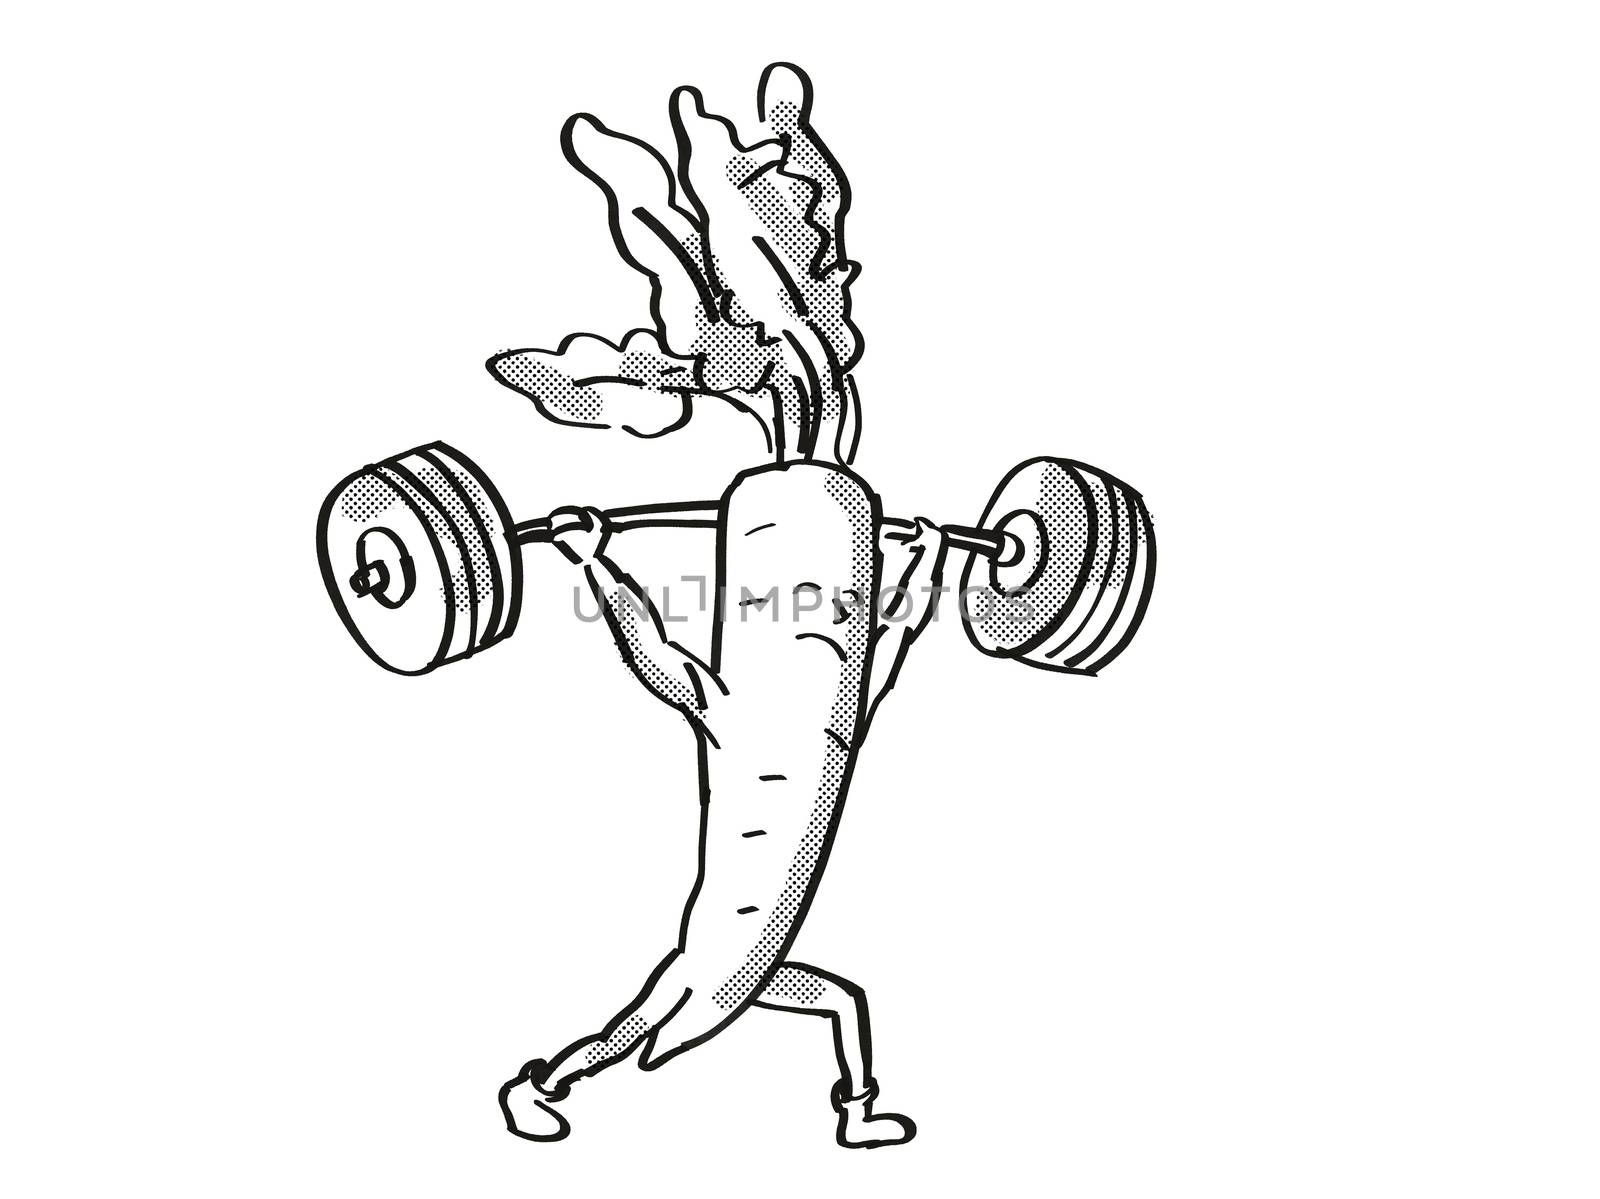 Retro cartoon style drawing of a Radish, a healthy vegetable lifting a barbell on isolated white background done in black and white.